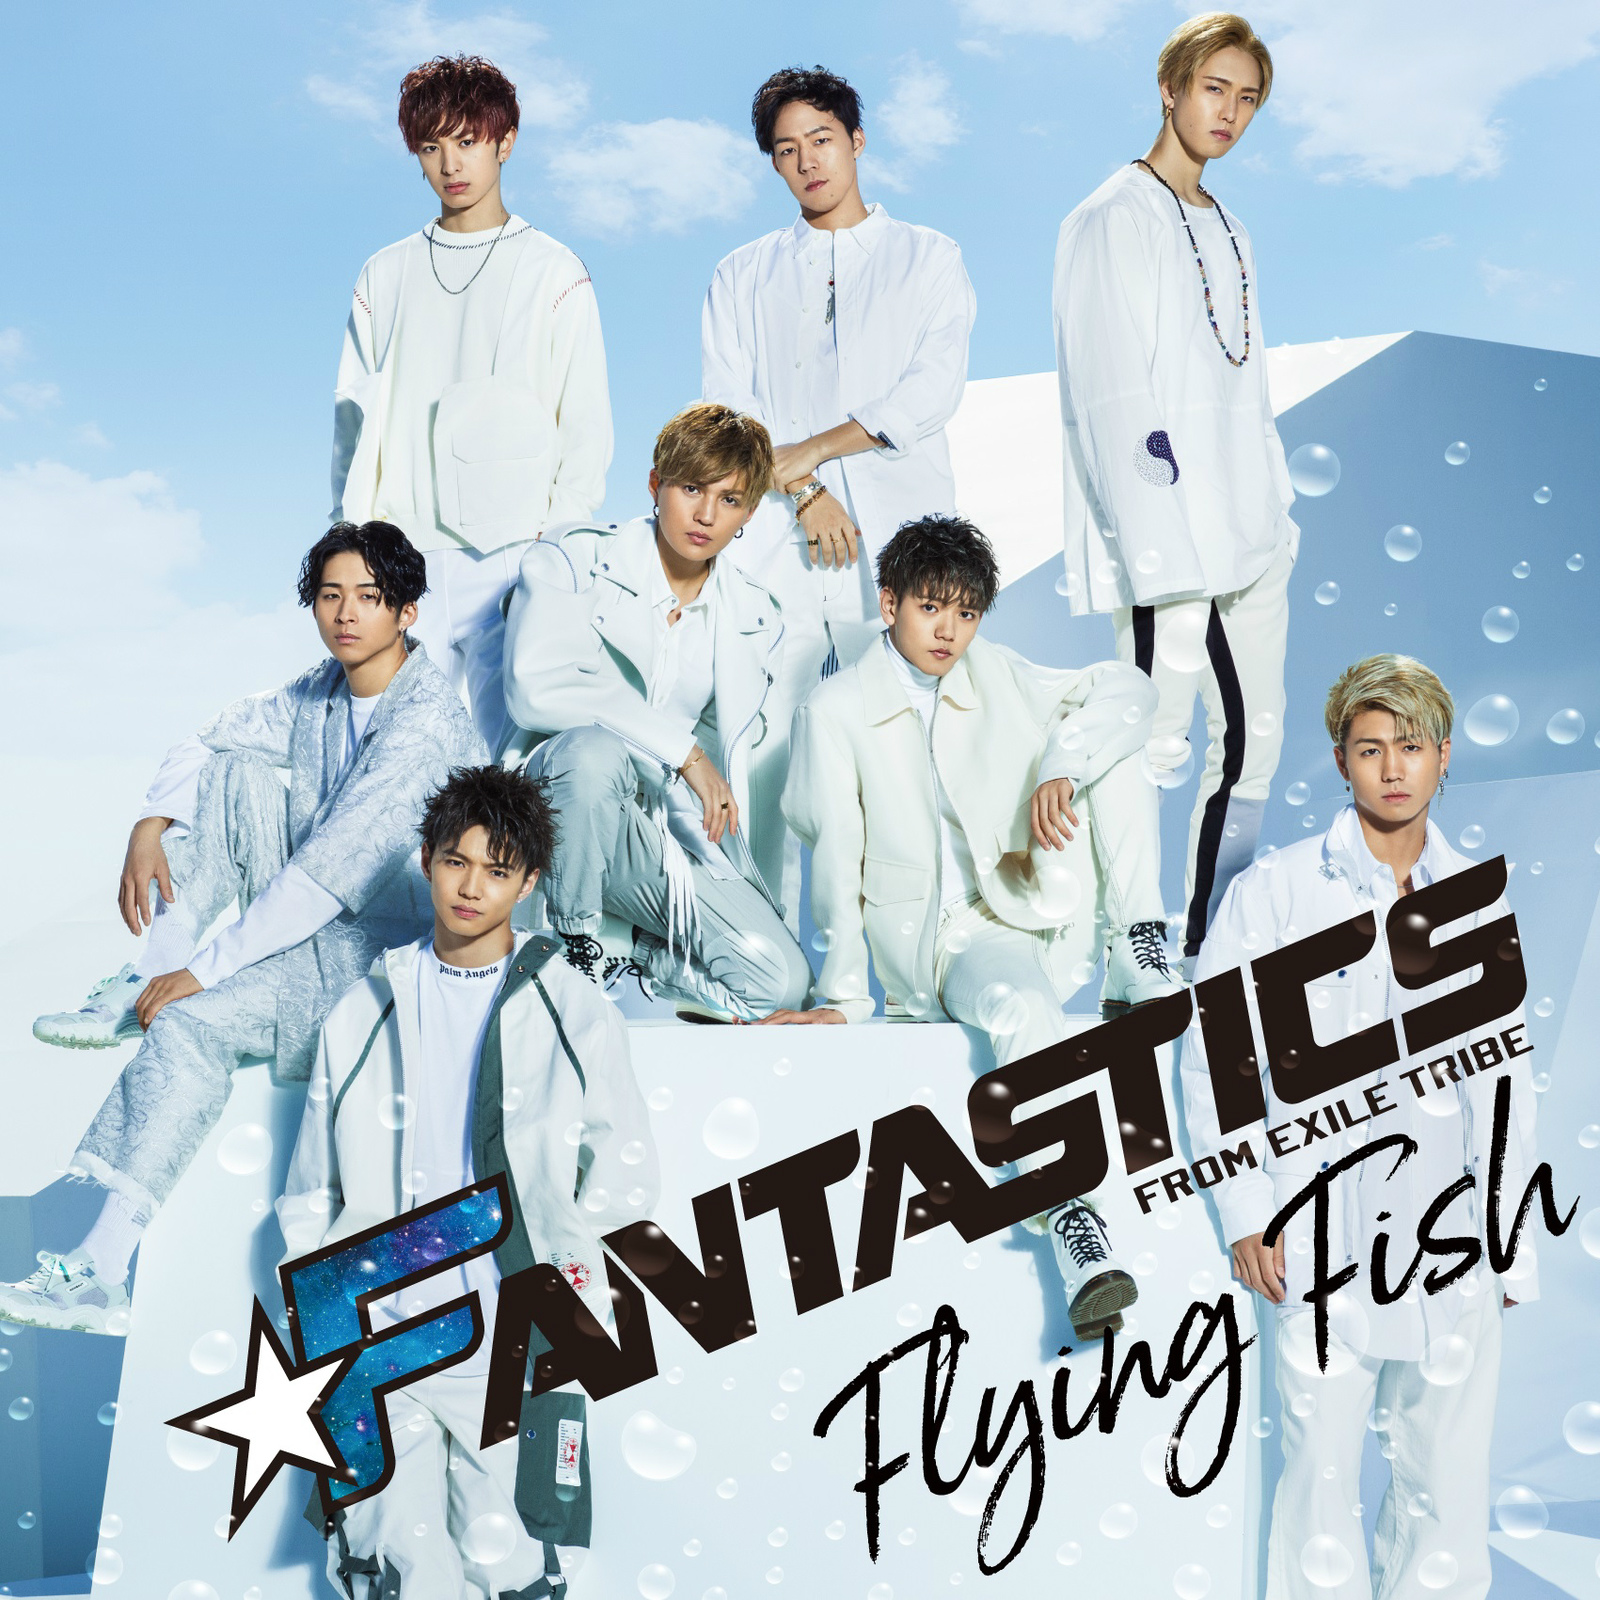 OVER DRIVE (English Version)歌词 歌手FANTASTICS from EXILE TRIBE-专辑Flying Fish-单曲《OVER DRIVE (English Version)》LRC歌词下载